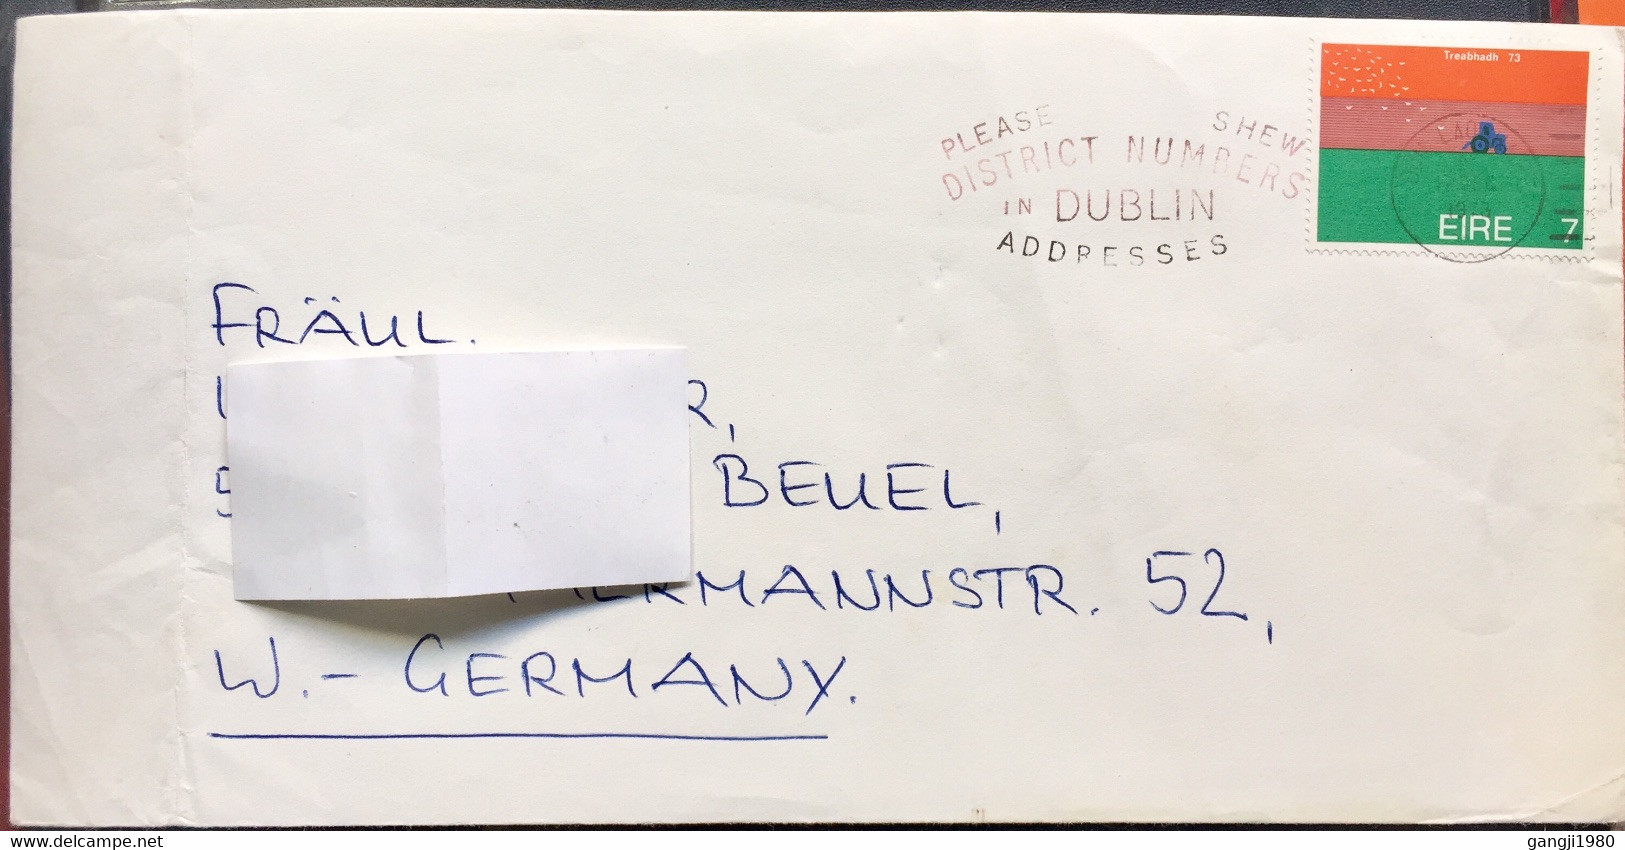 IRELAND 1973,POSTAL STATIONARY COVER, USED TO GERMANY, COLOUR SLOGAN, PLEASE SHEW DISTRICT NUMBER IN DUBLIN ADDRESSES - Ganzsachen